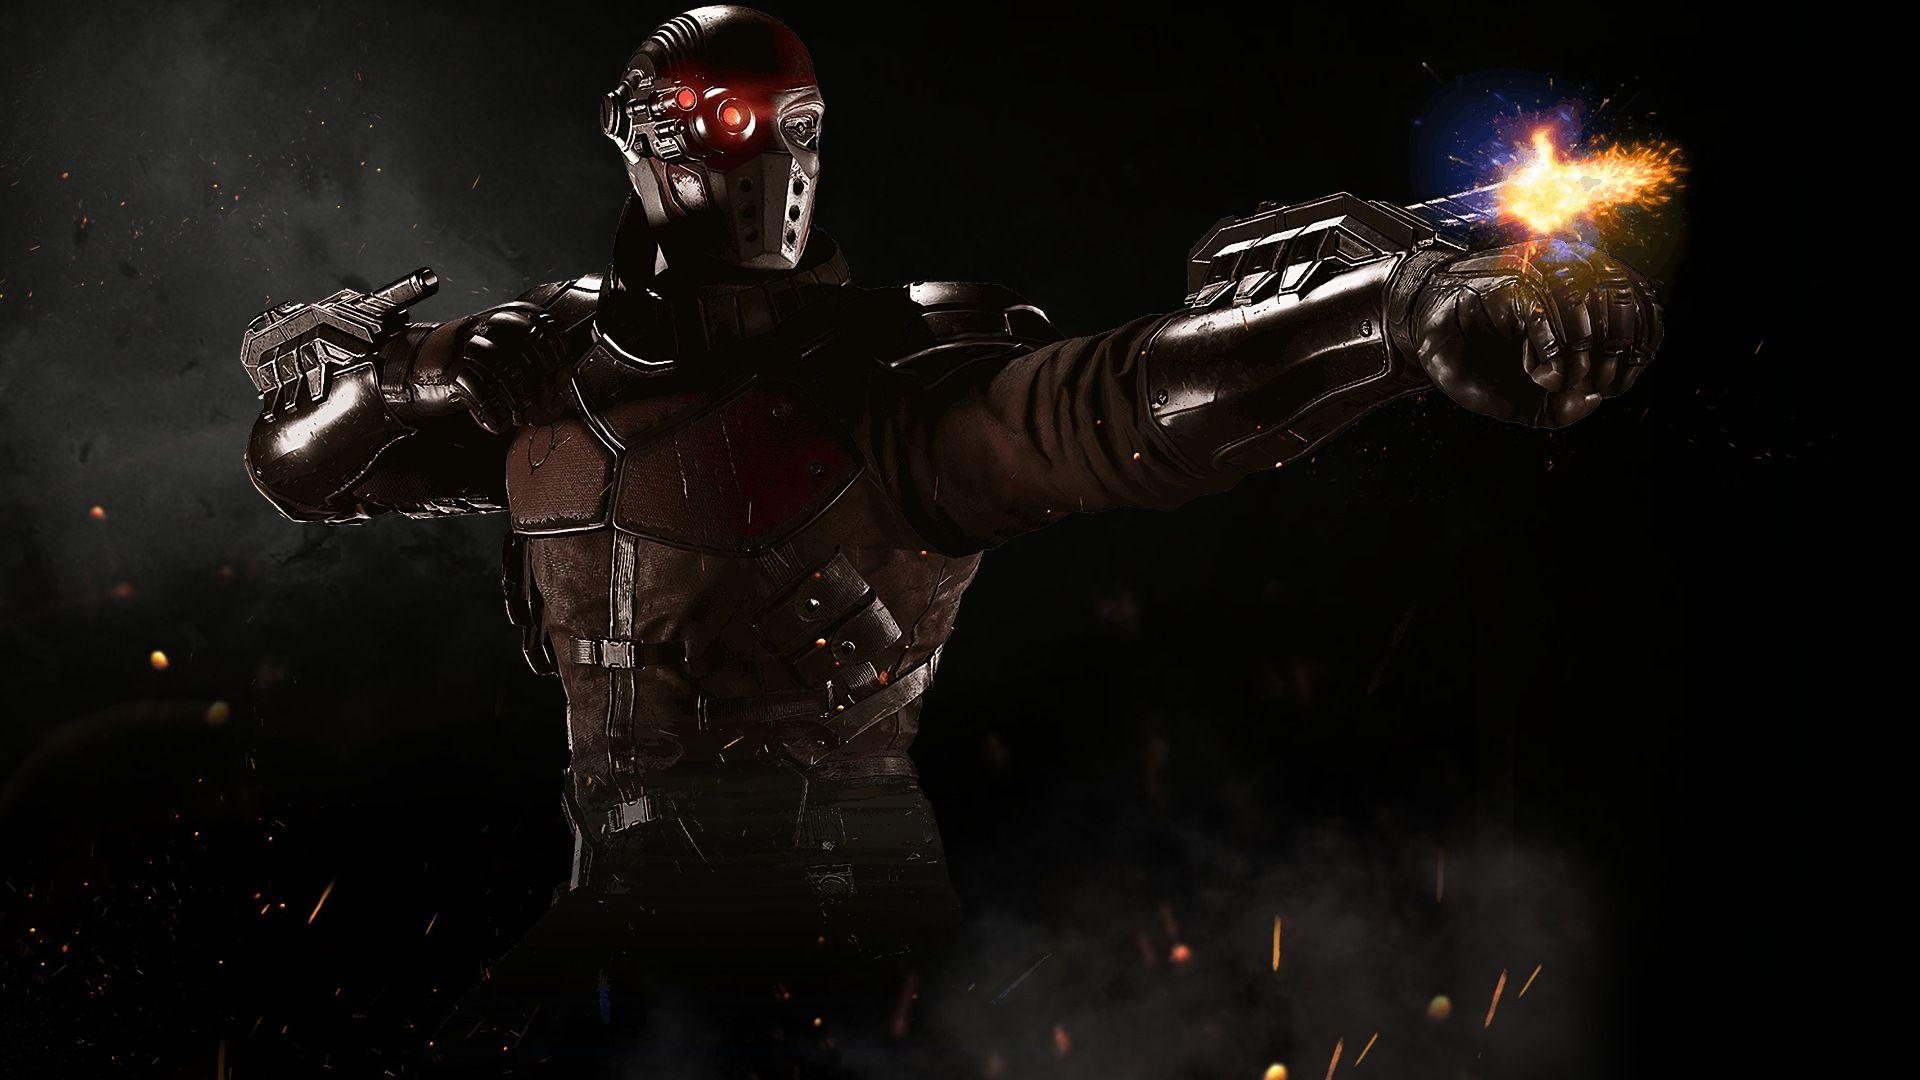 Cool Deadshot Injustice Game 1920x1080 Wallpaper Wpt7603225